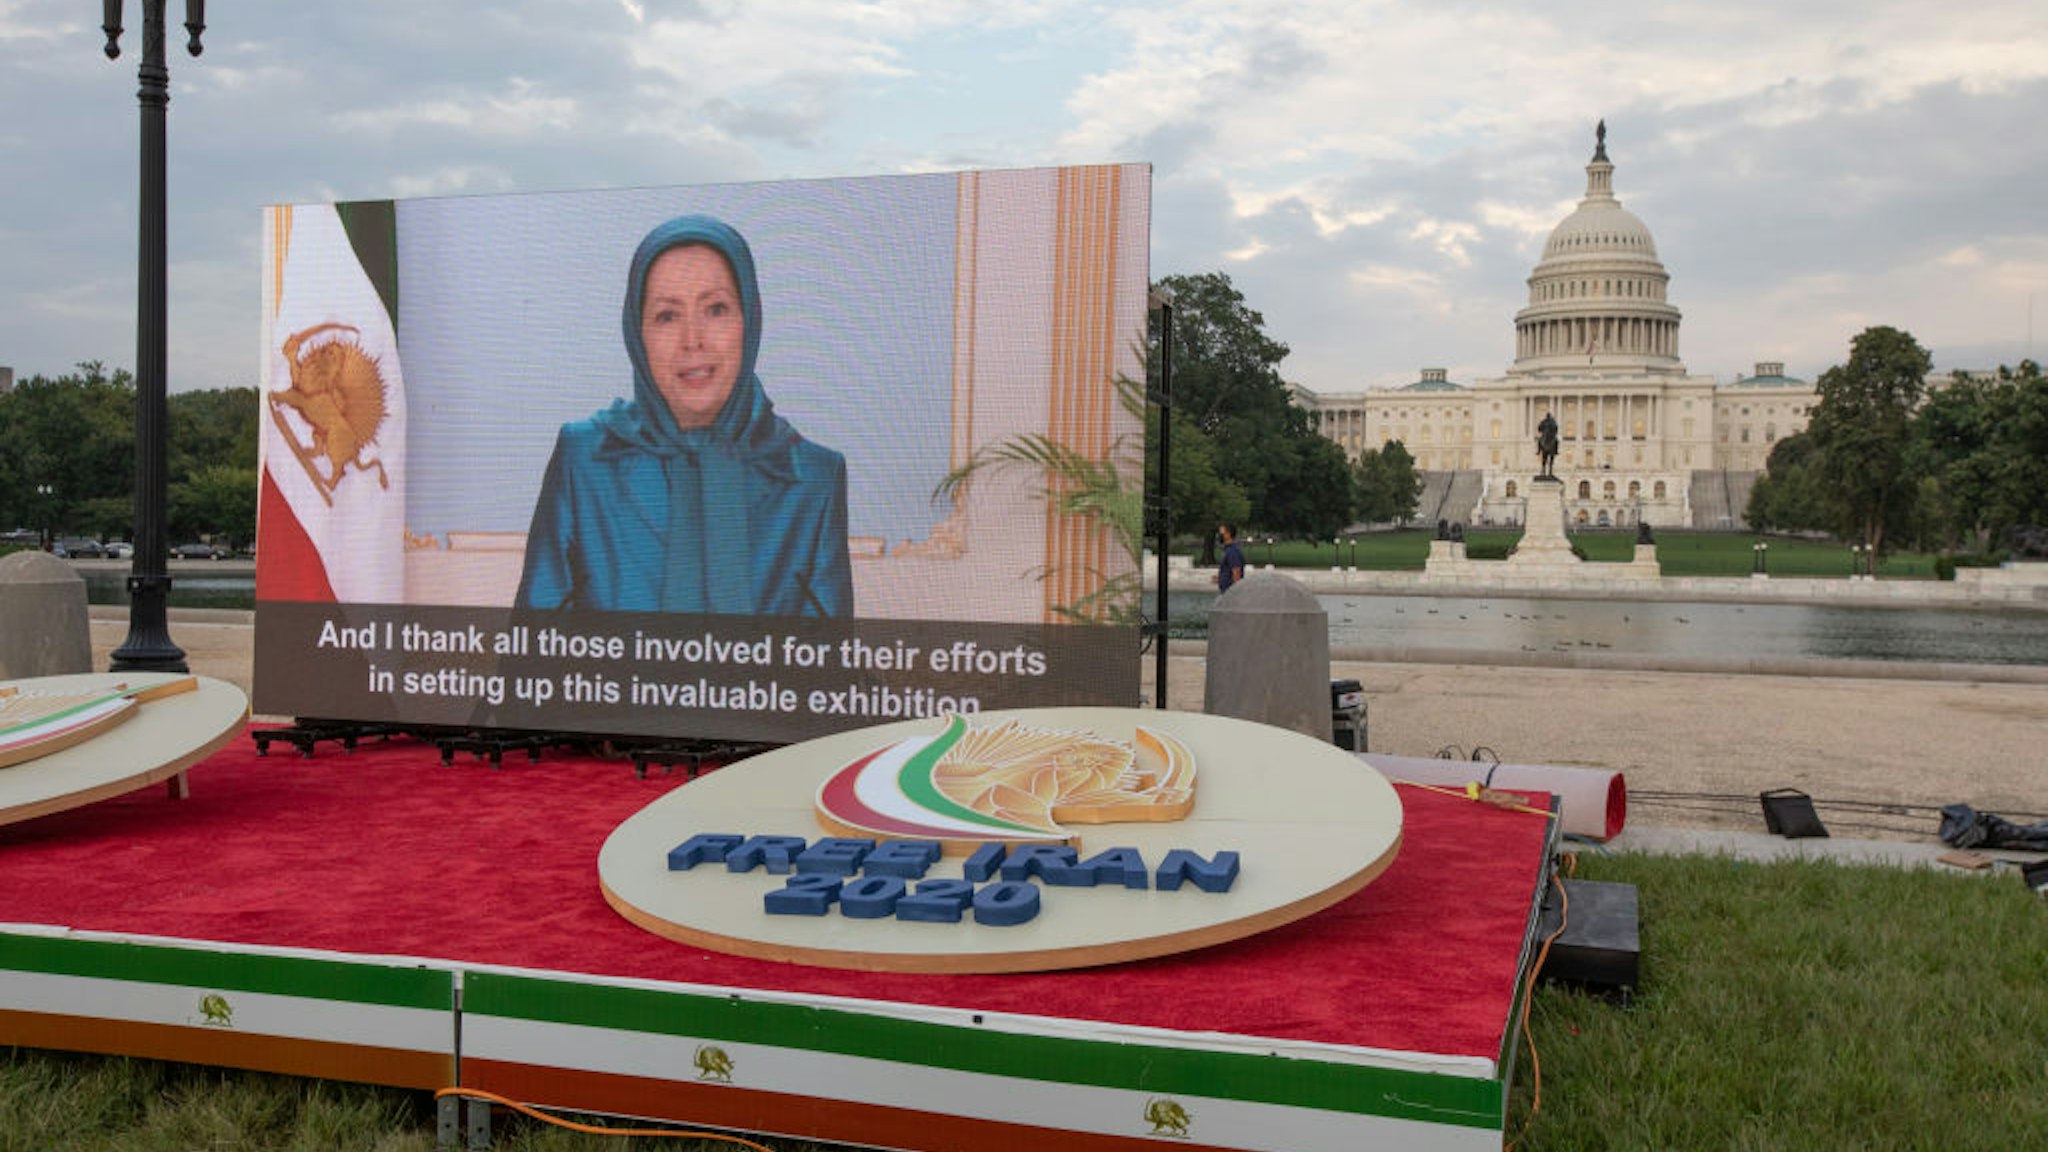 Maryam Rajavi, A photo exhibit in remembrance of 120,000 dissidents, mostly members of the Iranian opposition group the Mujahedin-e Khalq (MEK), executed by the Iranian regime, including 30,000 political prisoners massacred in 1988, was held on Capitol grounds, Washington DC, US, on September 4, 2020.